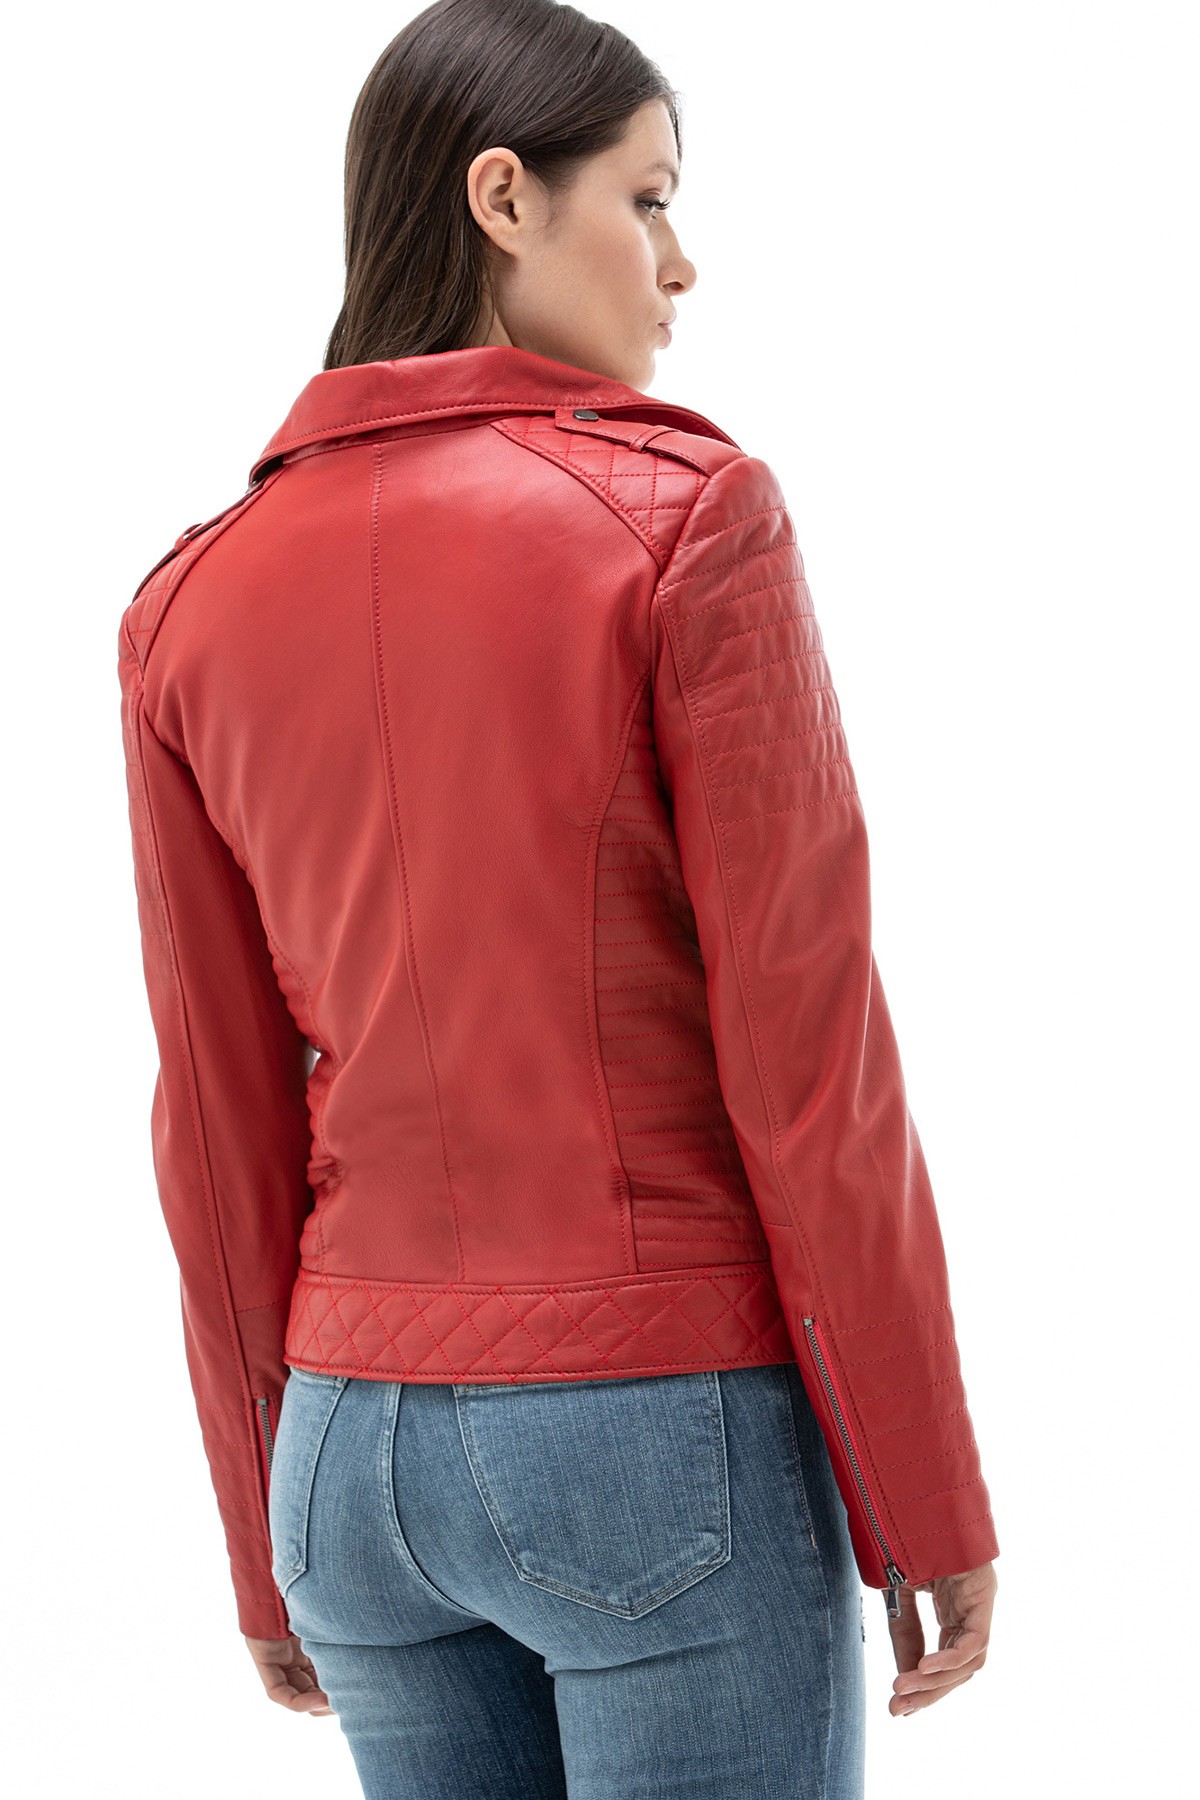 Womens 100 Real Red Leather Biker Style Jacket